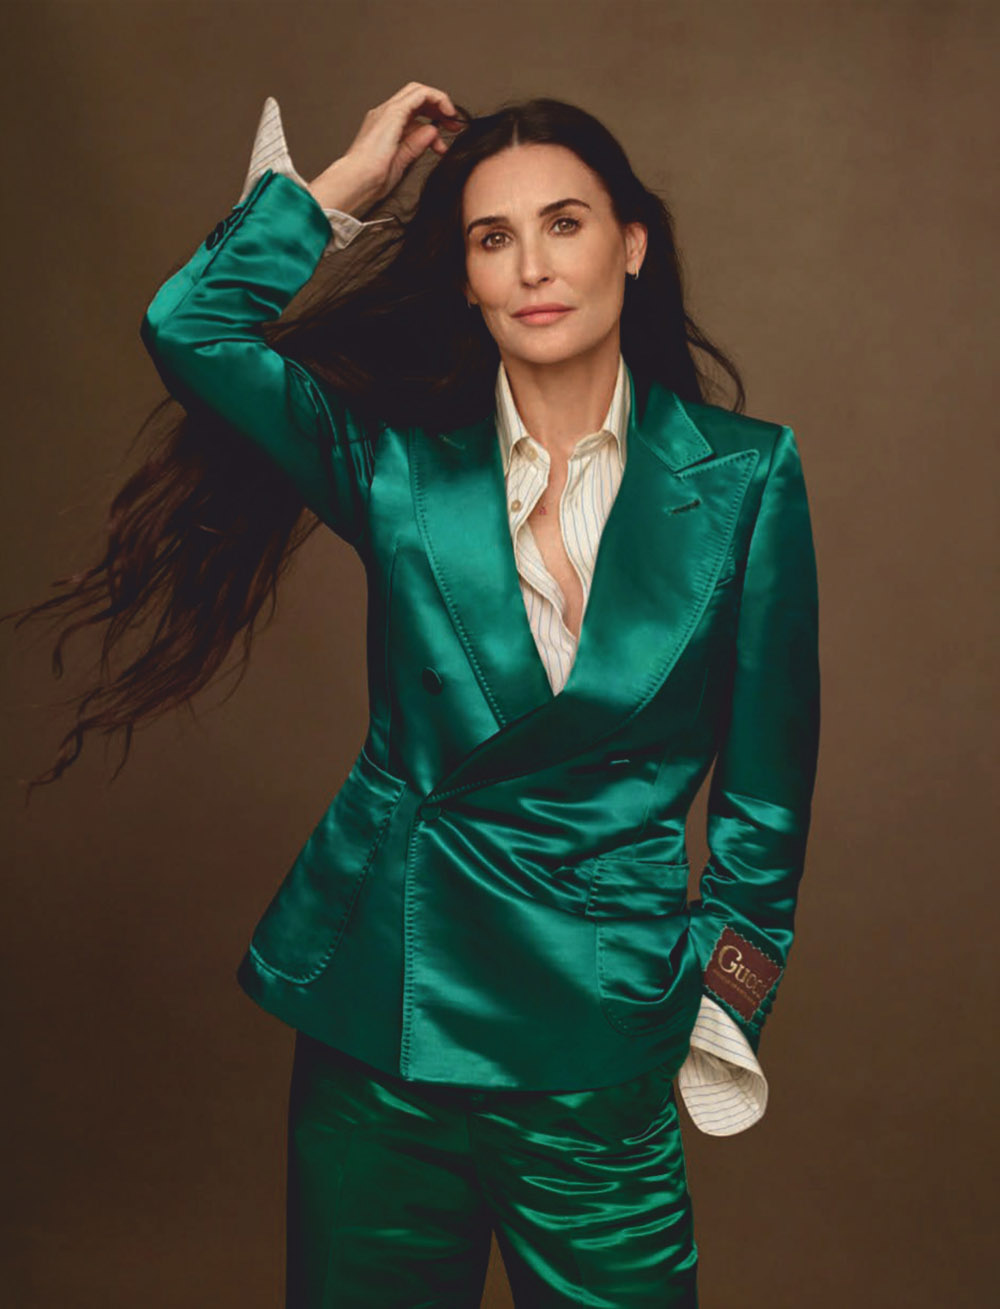 Demi Moore by Thomas Whiteside for Vogue Spain May 2020